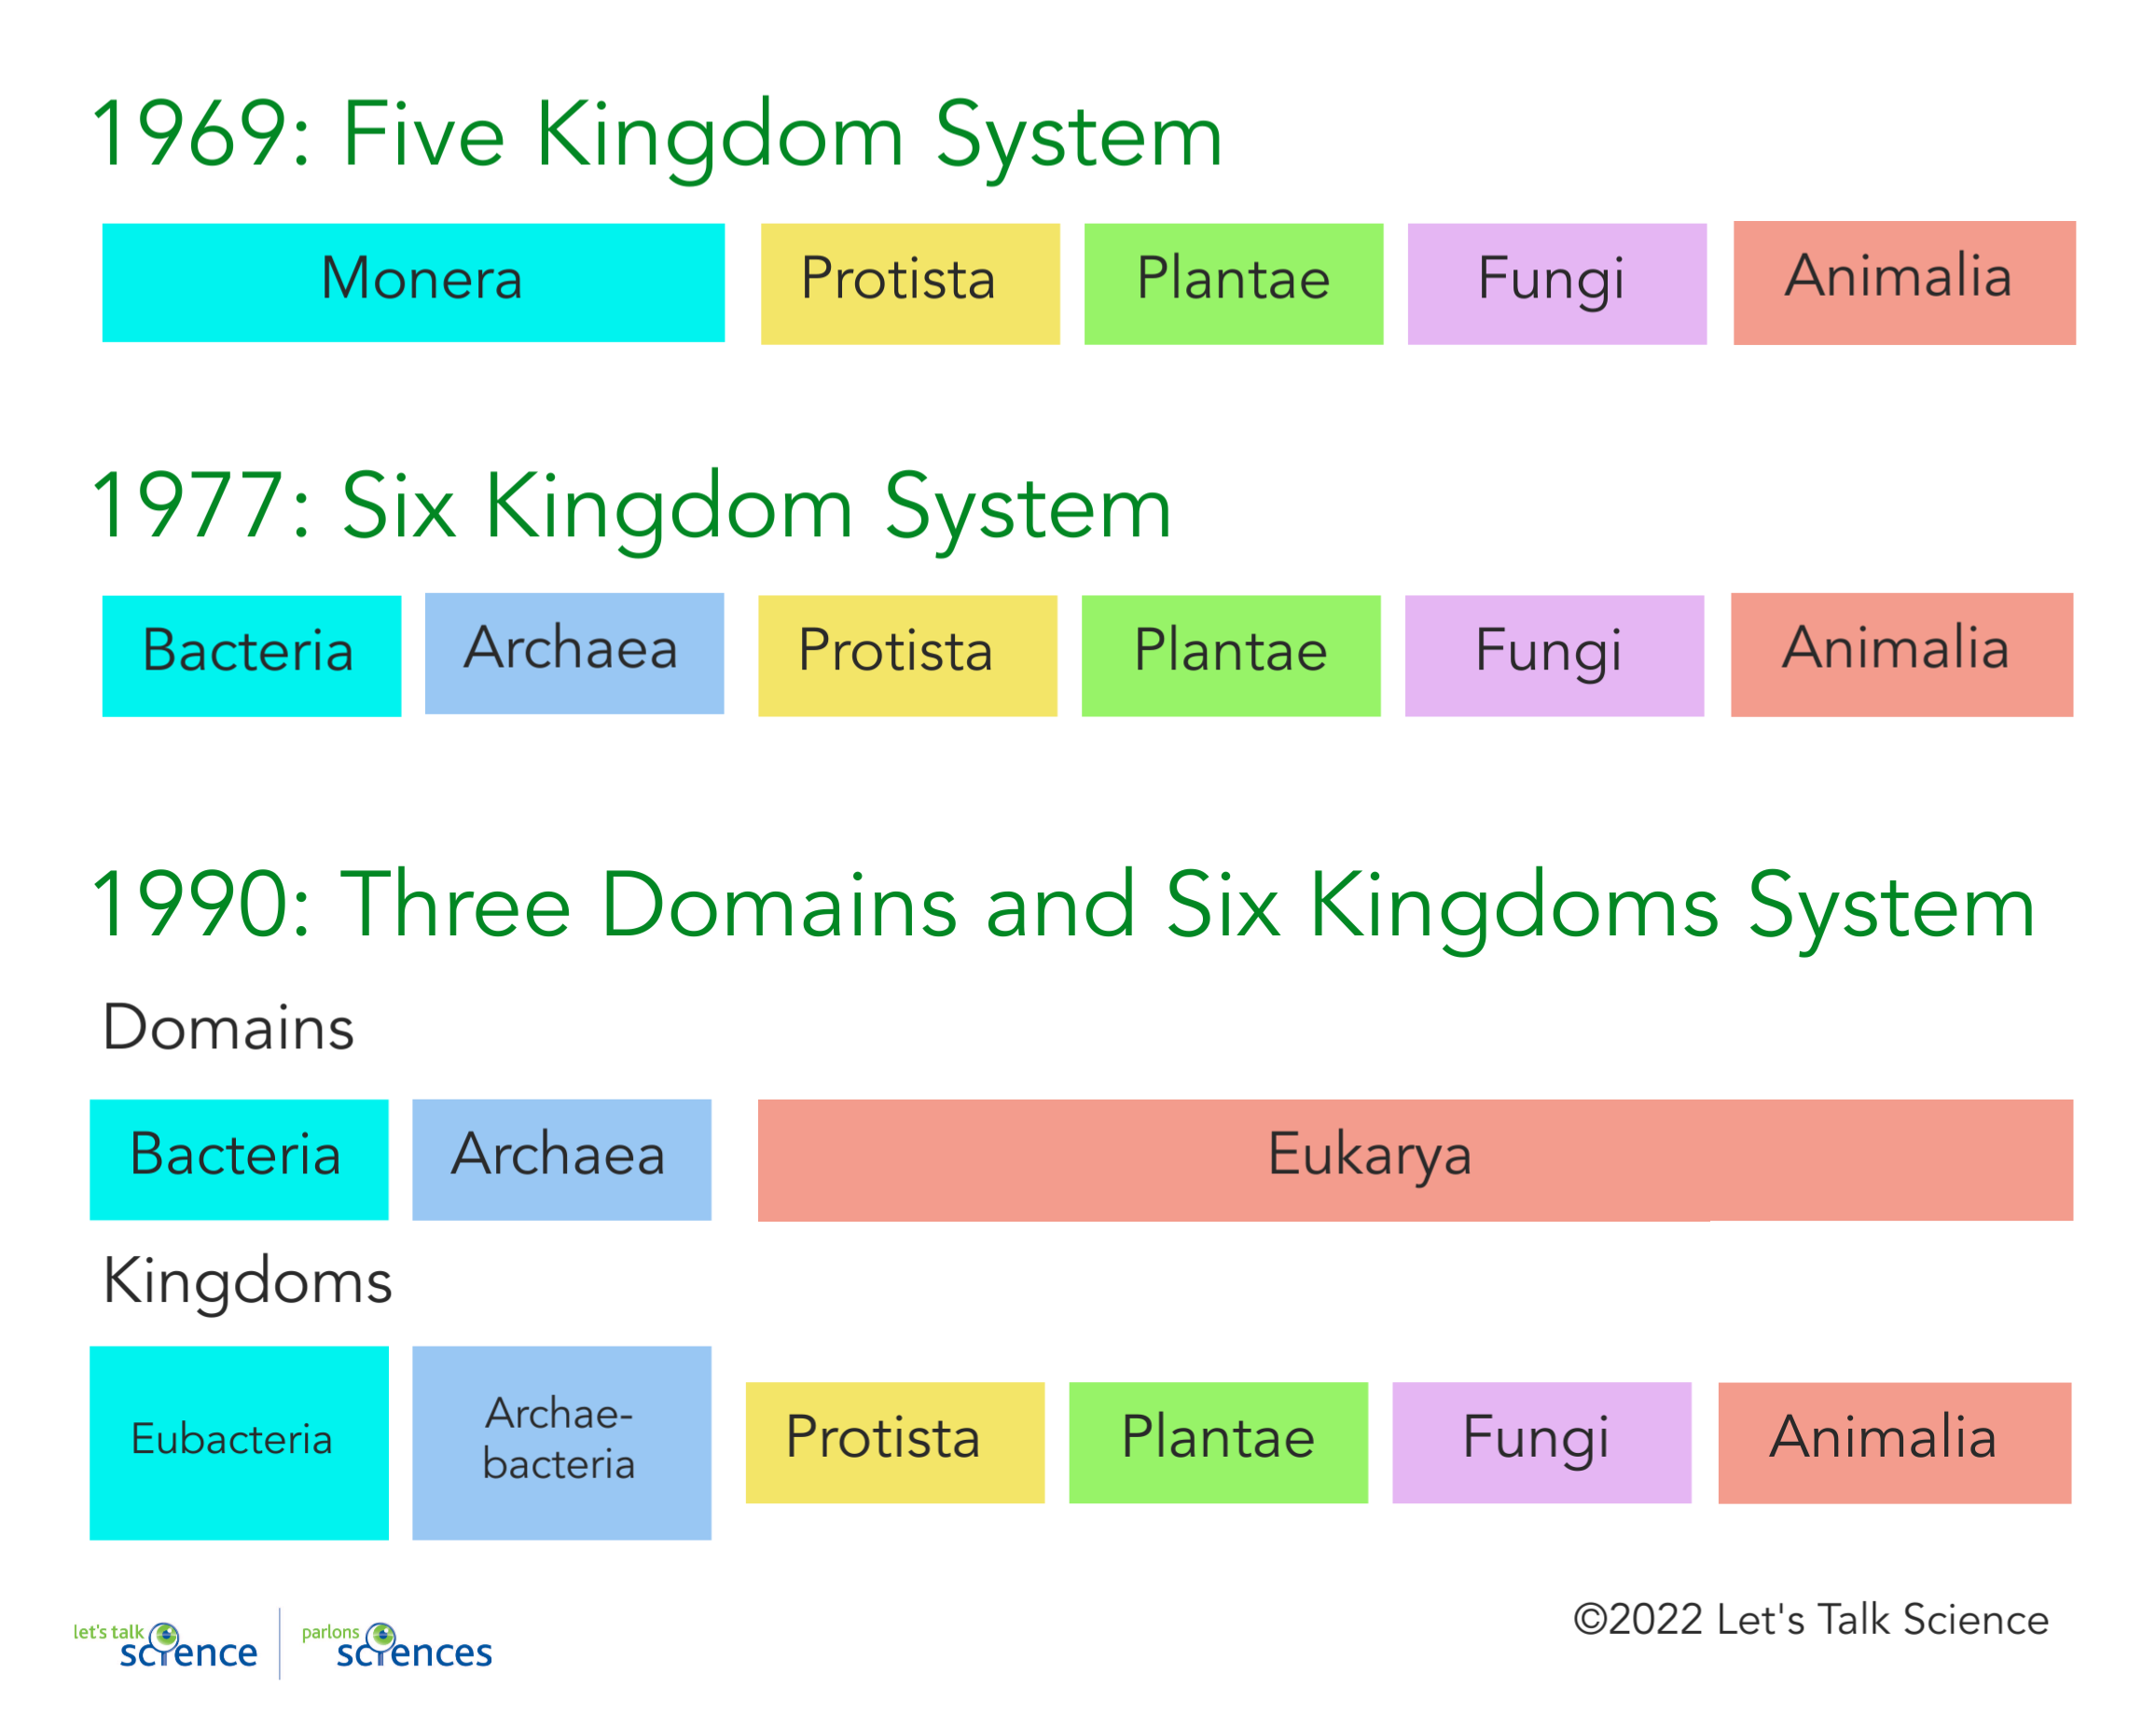 Shown is a colour illustration of the evolution of the kingdom classification system from the earliest in 1969 to 1977 and 1990.